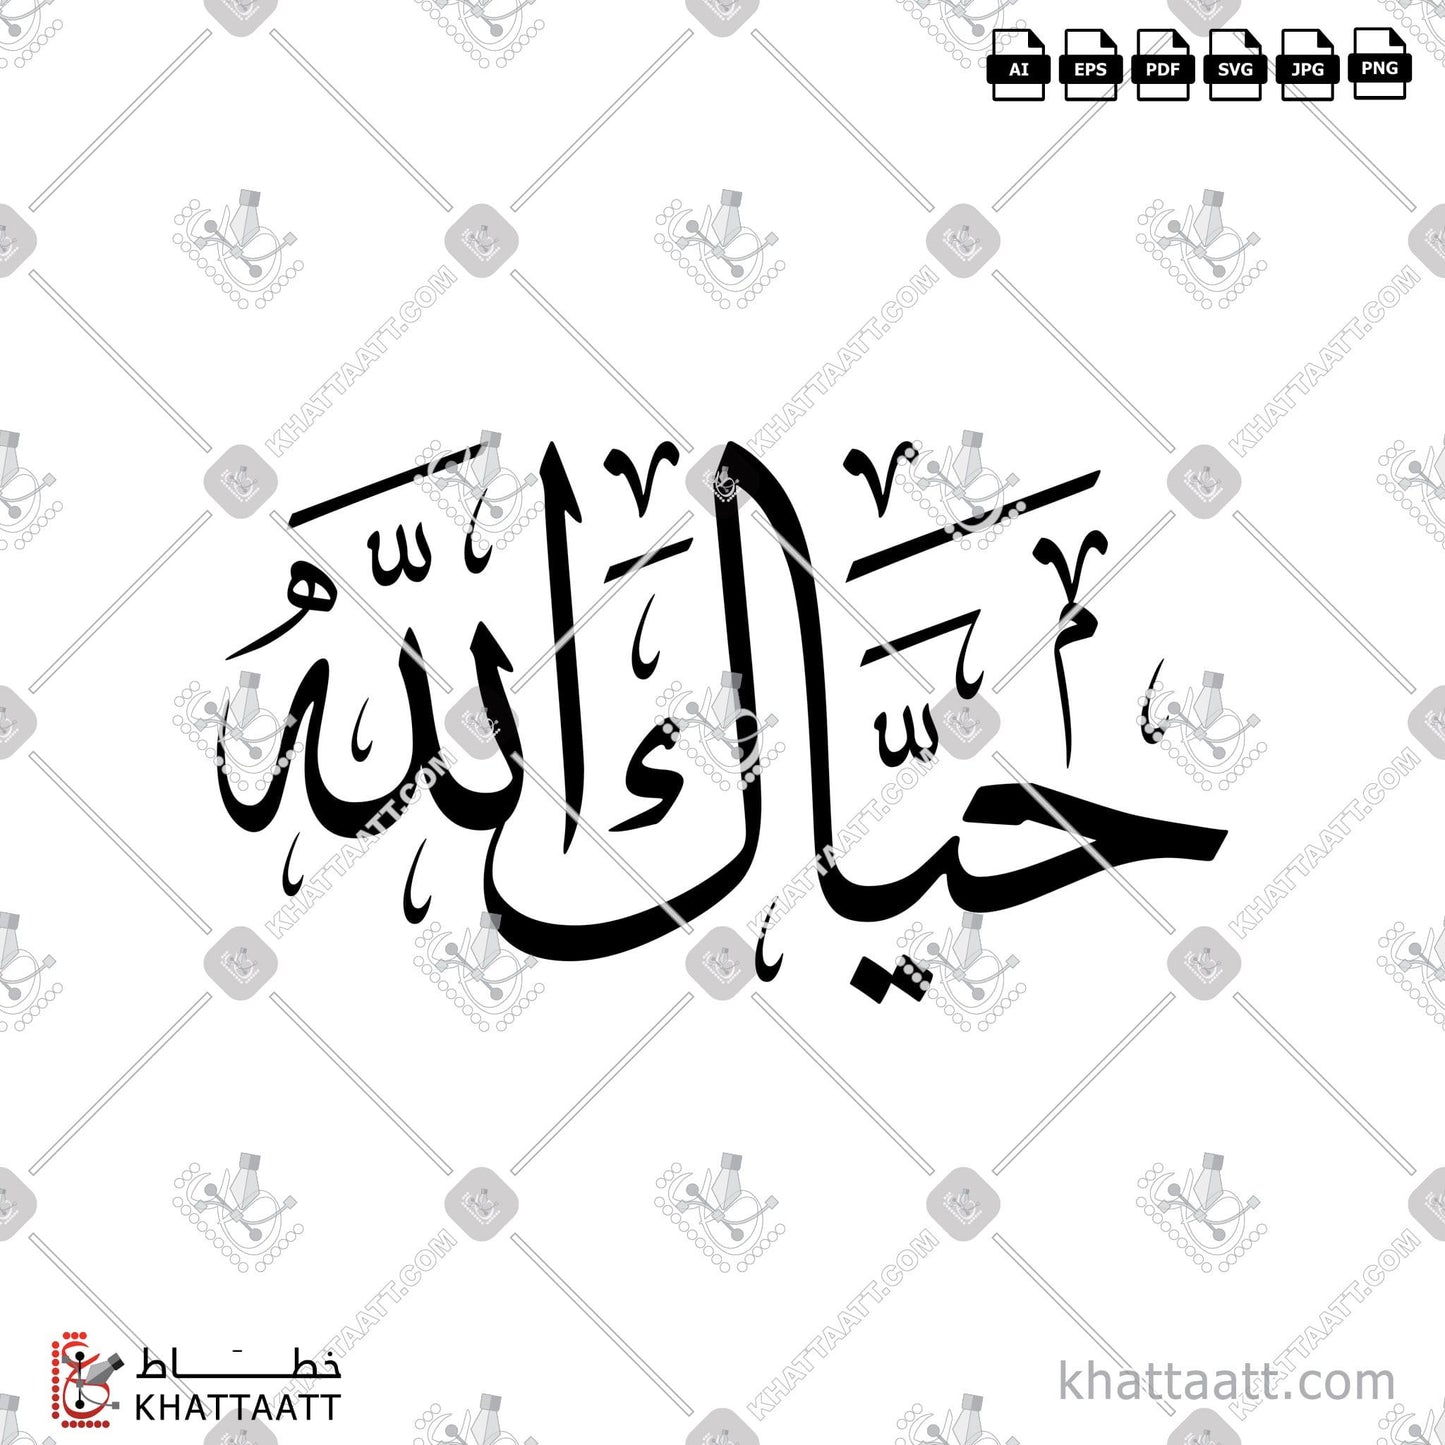 Download Arabic Calligraphy of حياك الله in Thuluth - خط الثلث in vector and .png